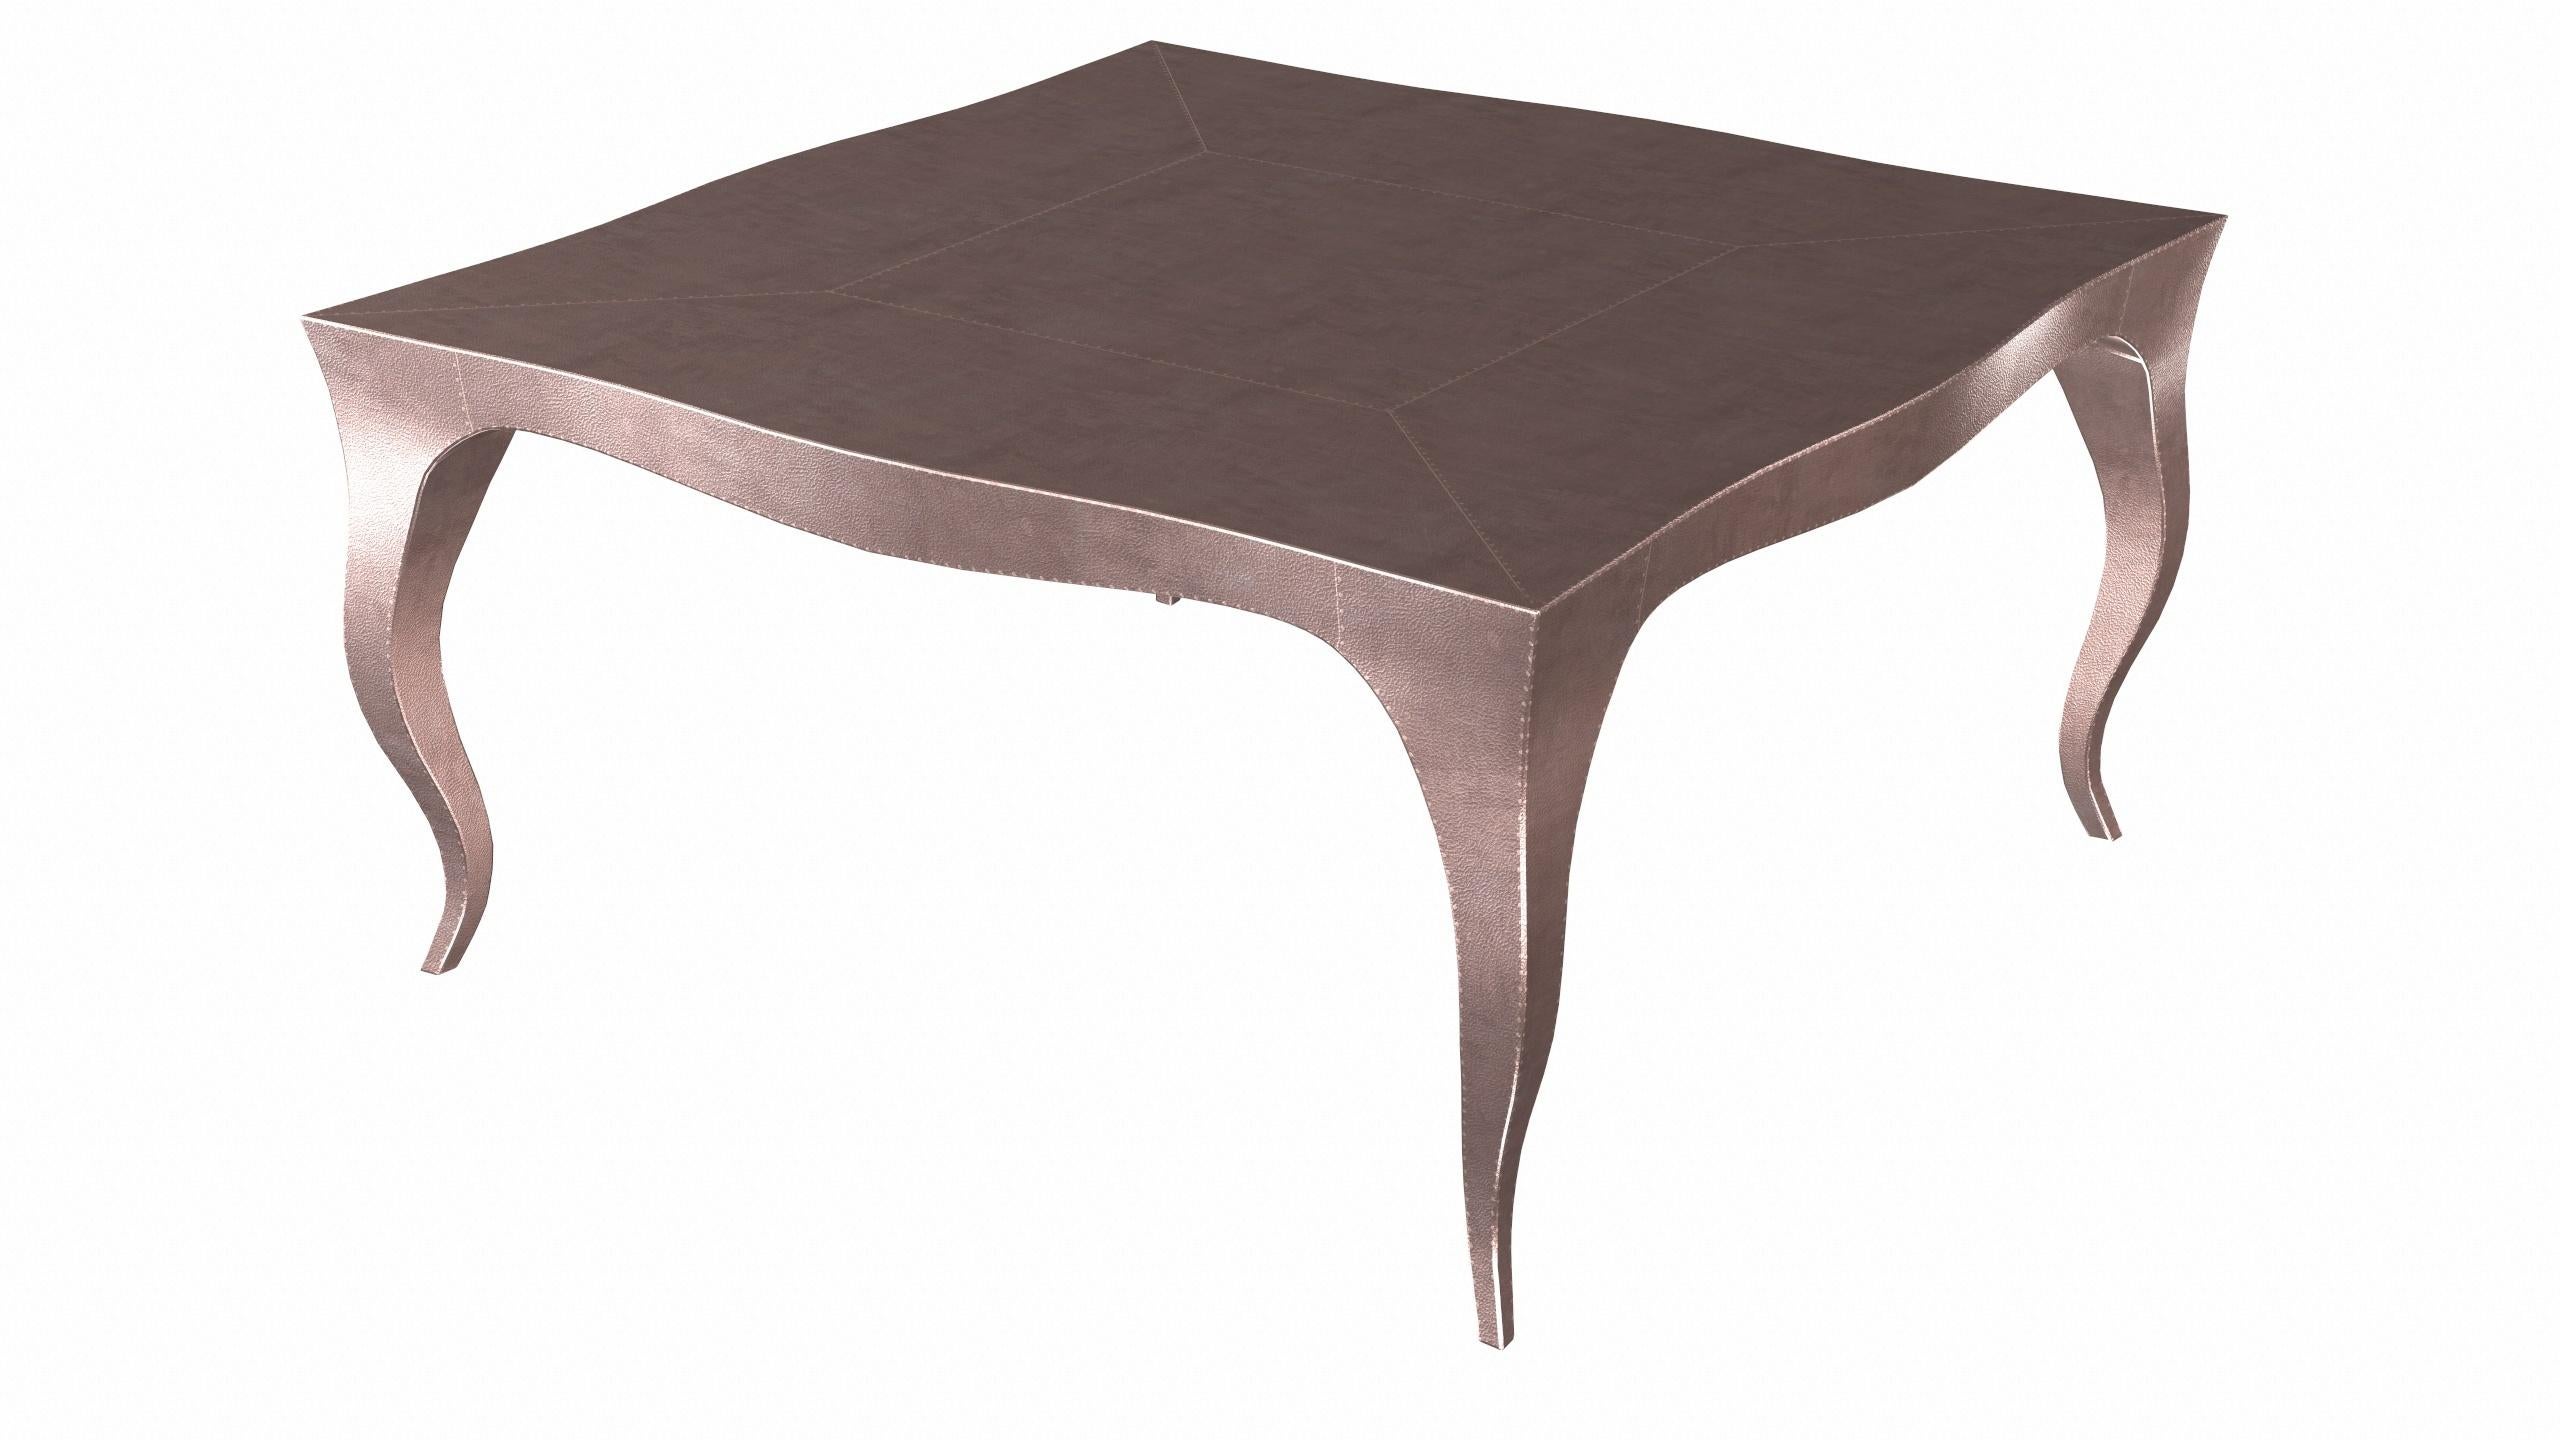 Contemporary Louise Art Deco Center Tables Fine Hammered Copper by Paul Mathieu for S.Odegard For Sale